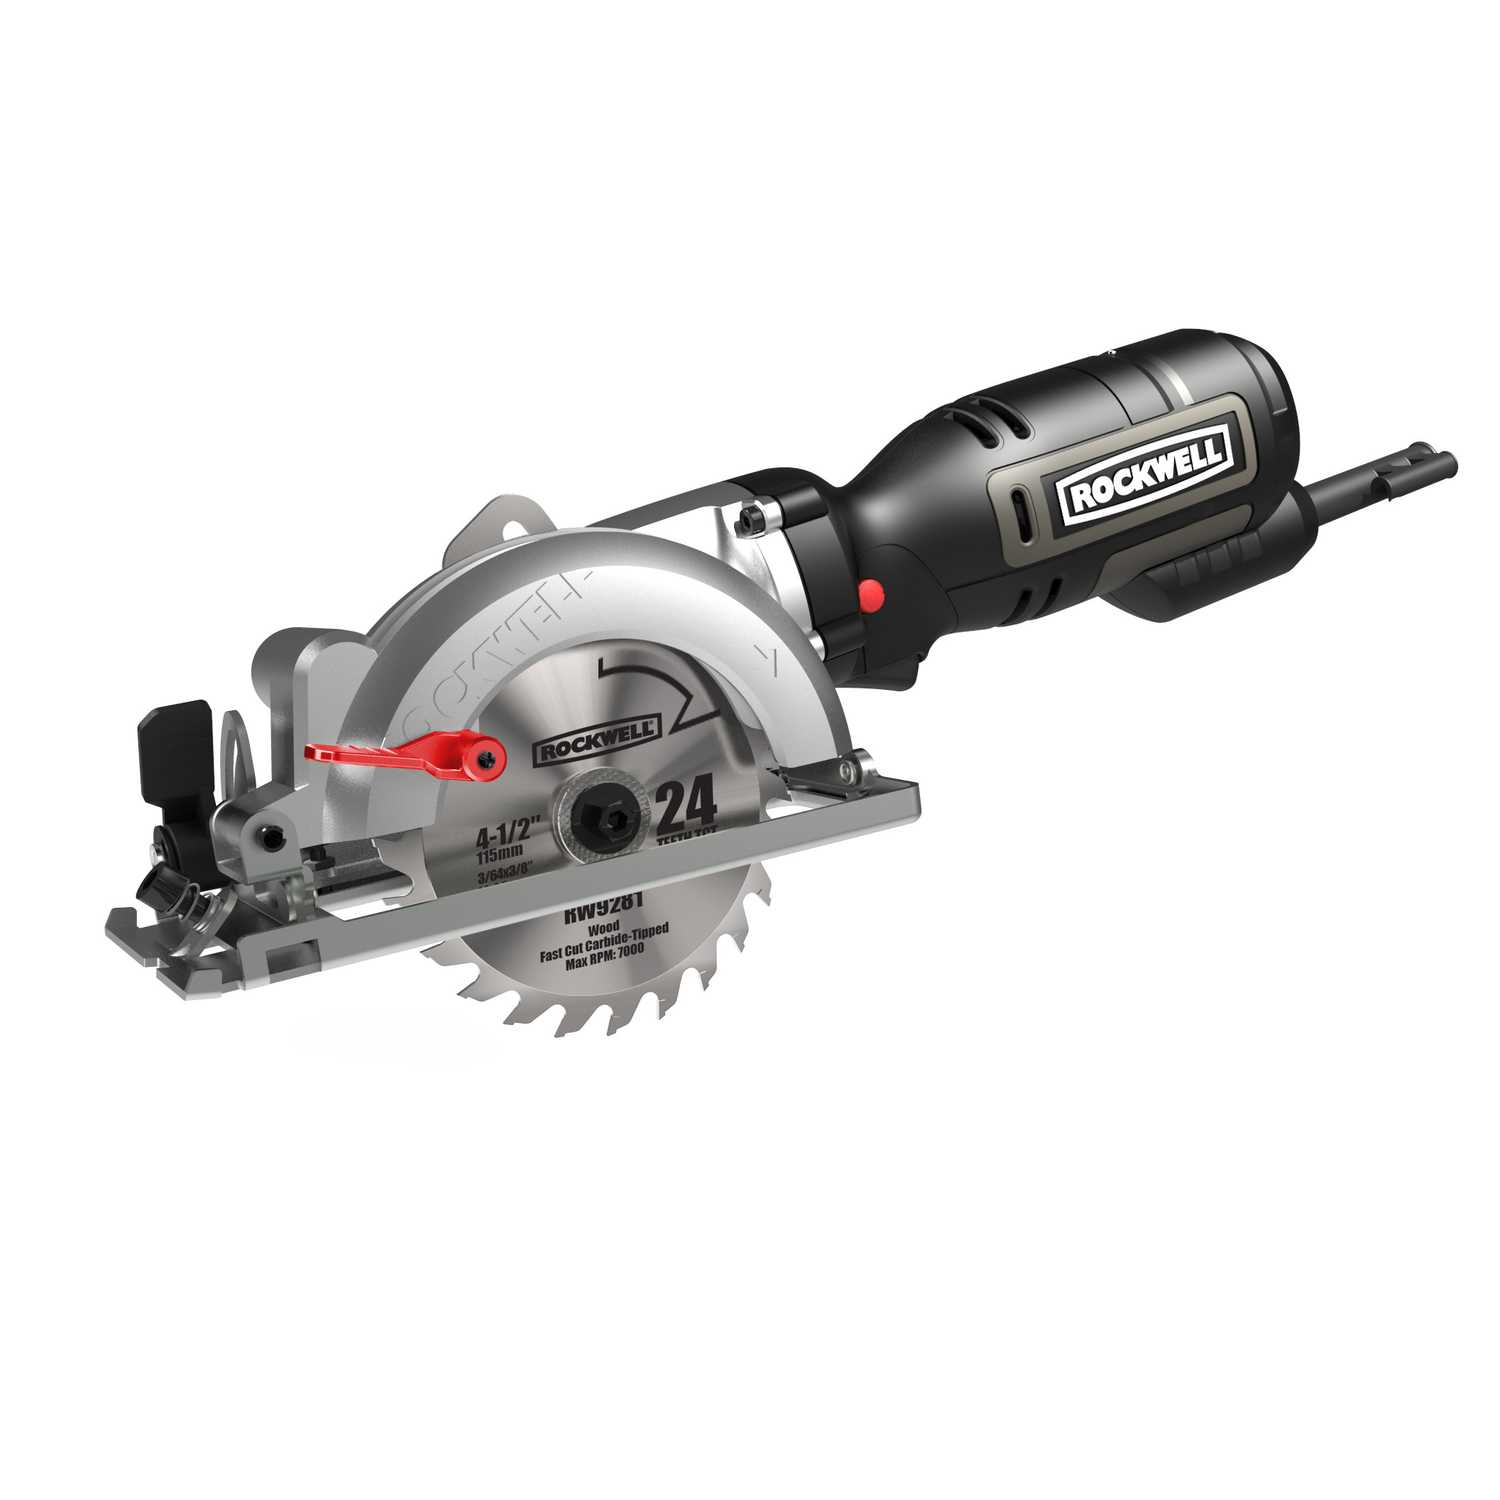 Rockwell 4-1/2 in. 5 amps Corded Compact Circular Saw 3500 rpm